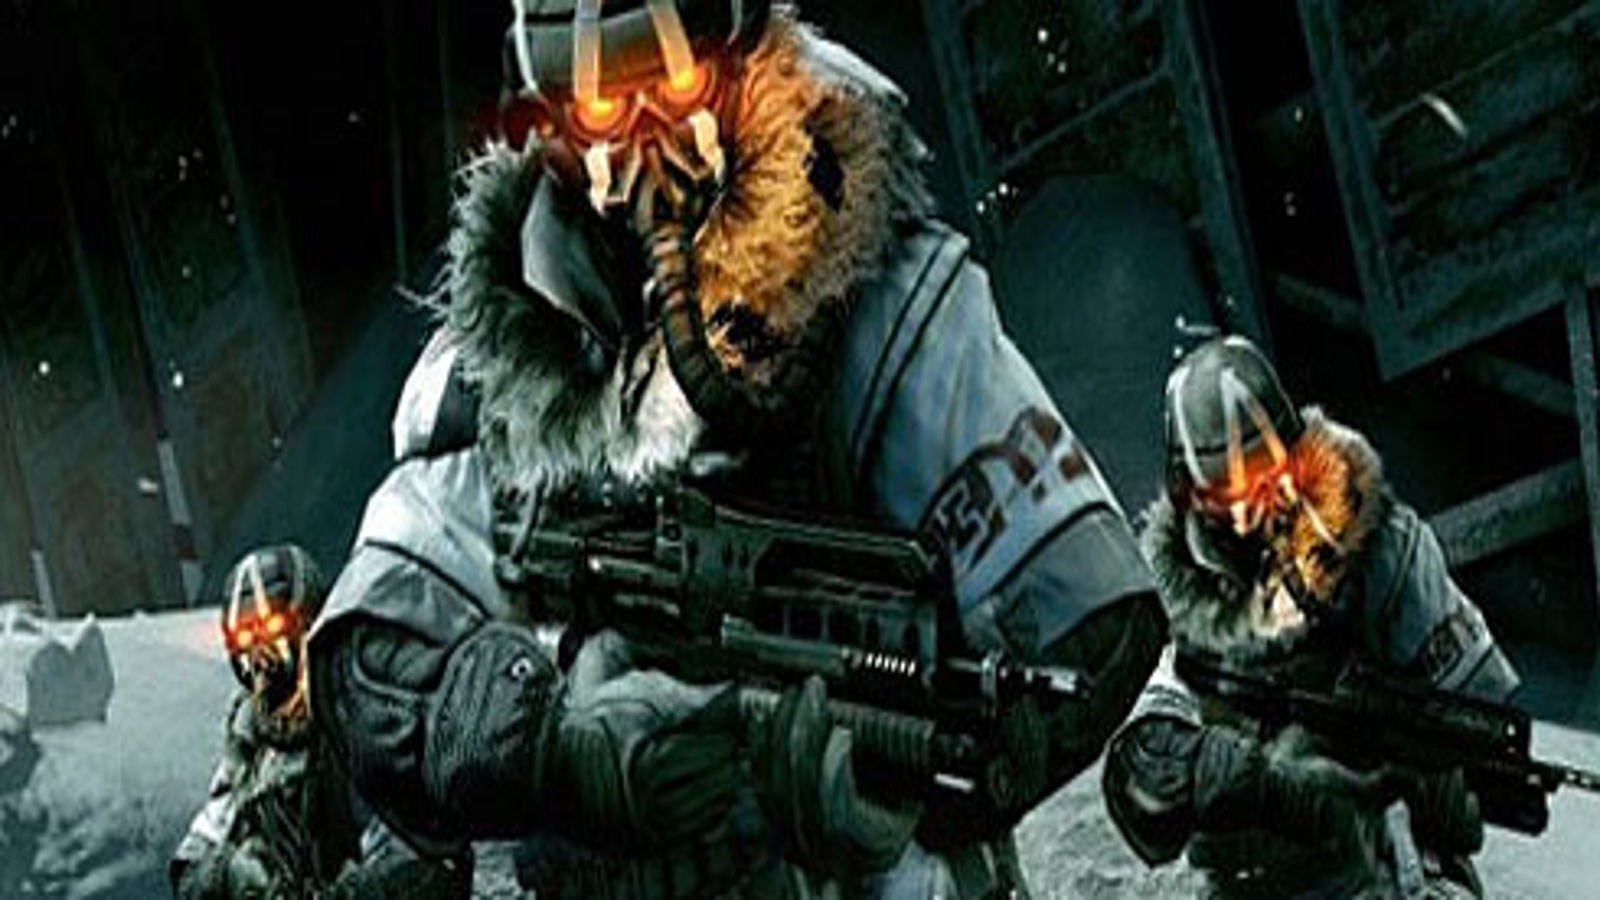 Killzone 3 features diverse environments, jump packs (preview) - A